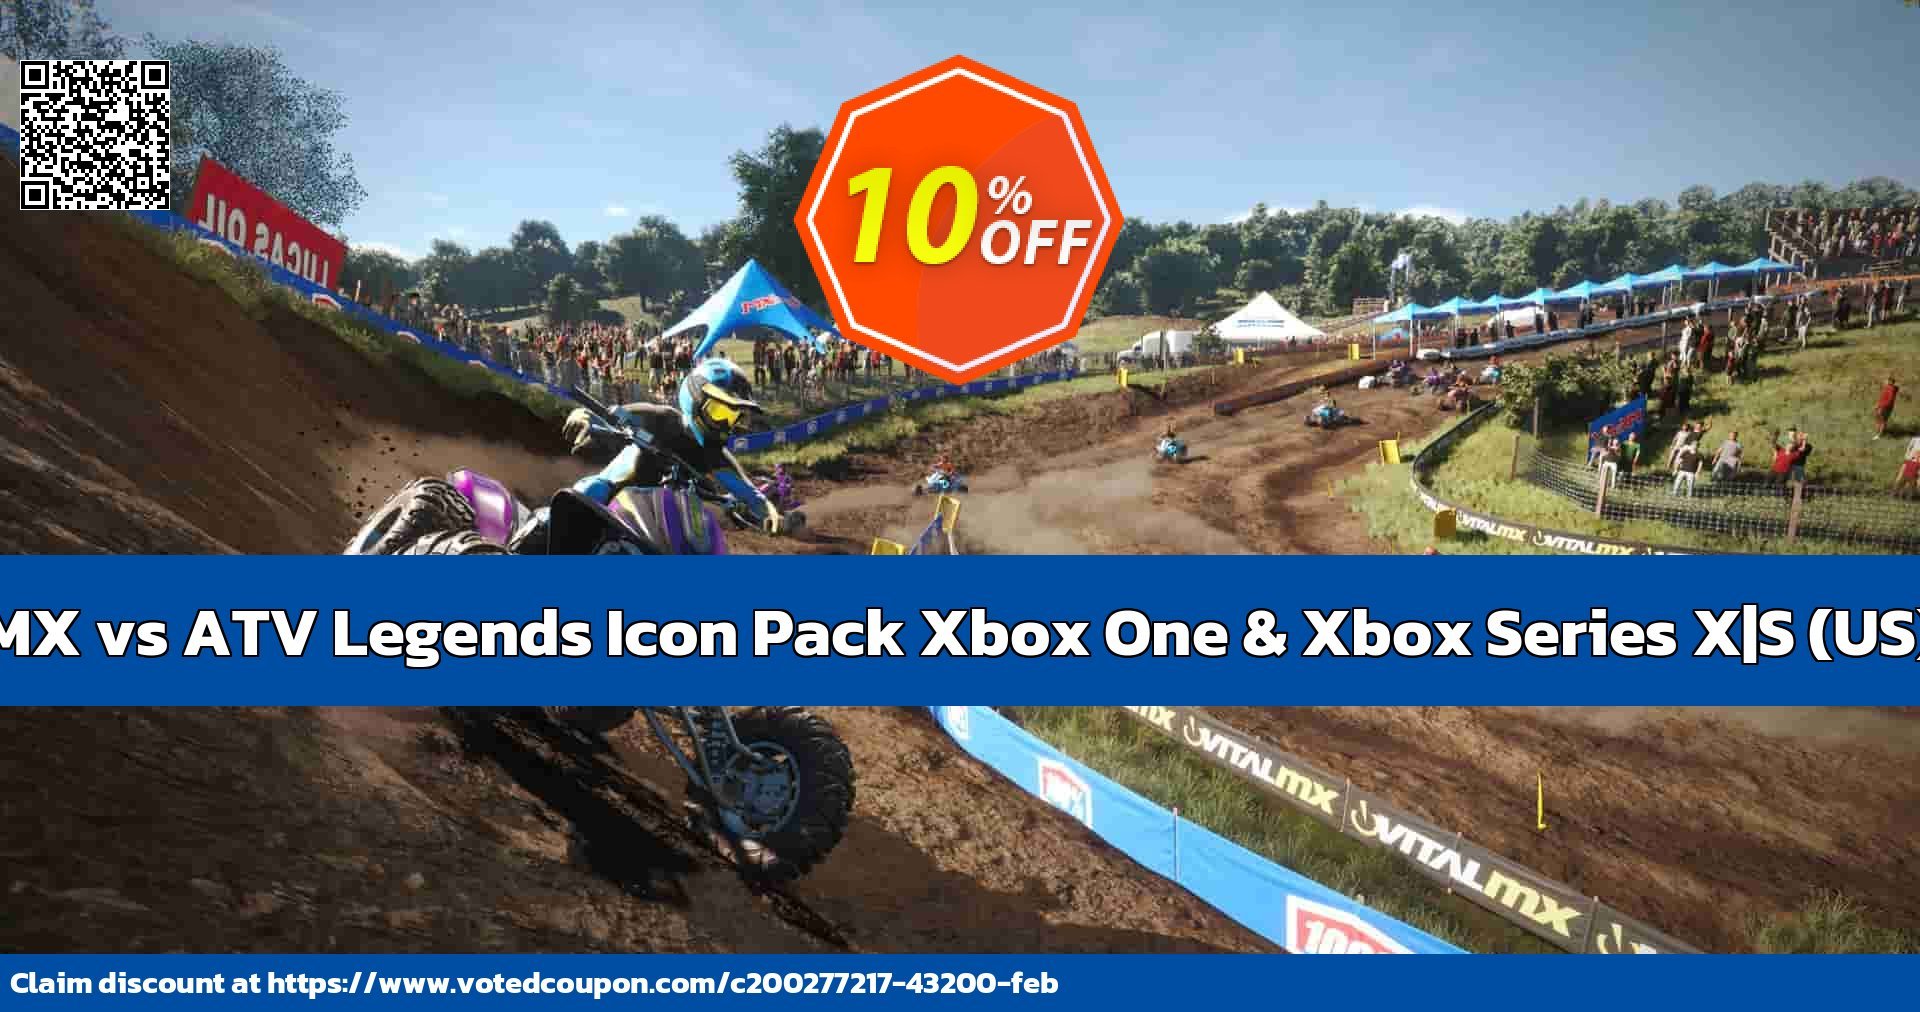 MX vs ATV Legends Icon Pack Xbox One & Xbox Series X|S, US  Coupon Code May 2024, 10% OFF - VotedCoupon